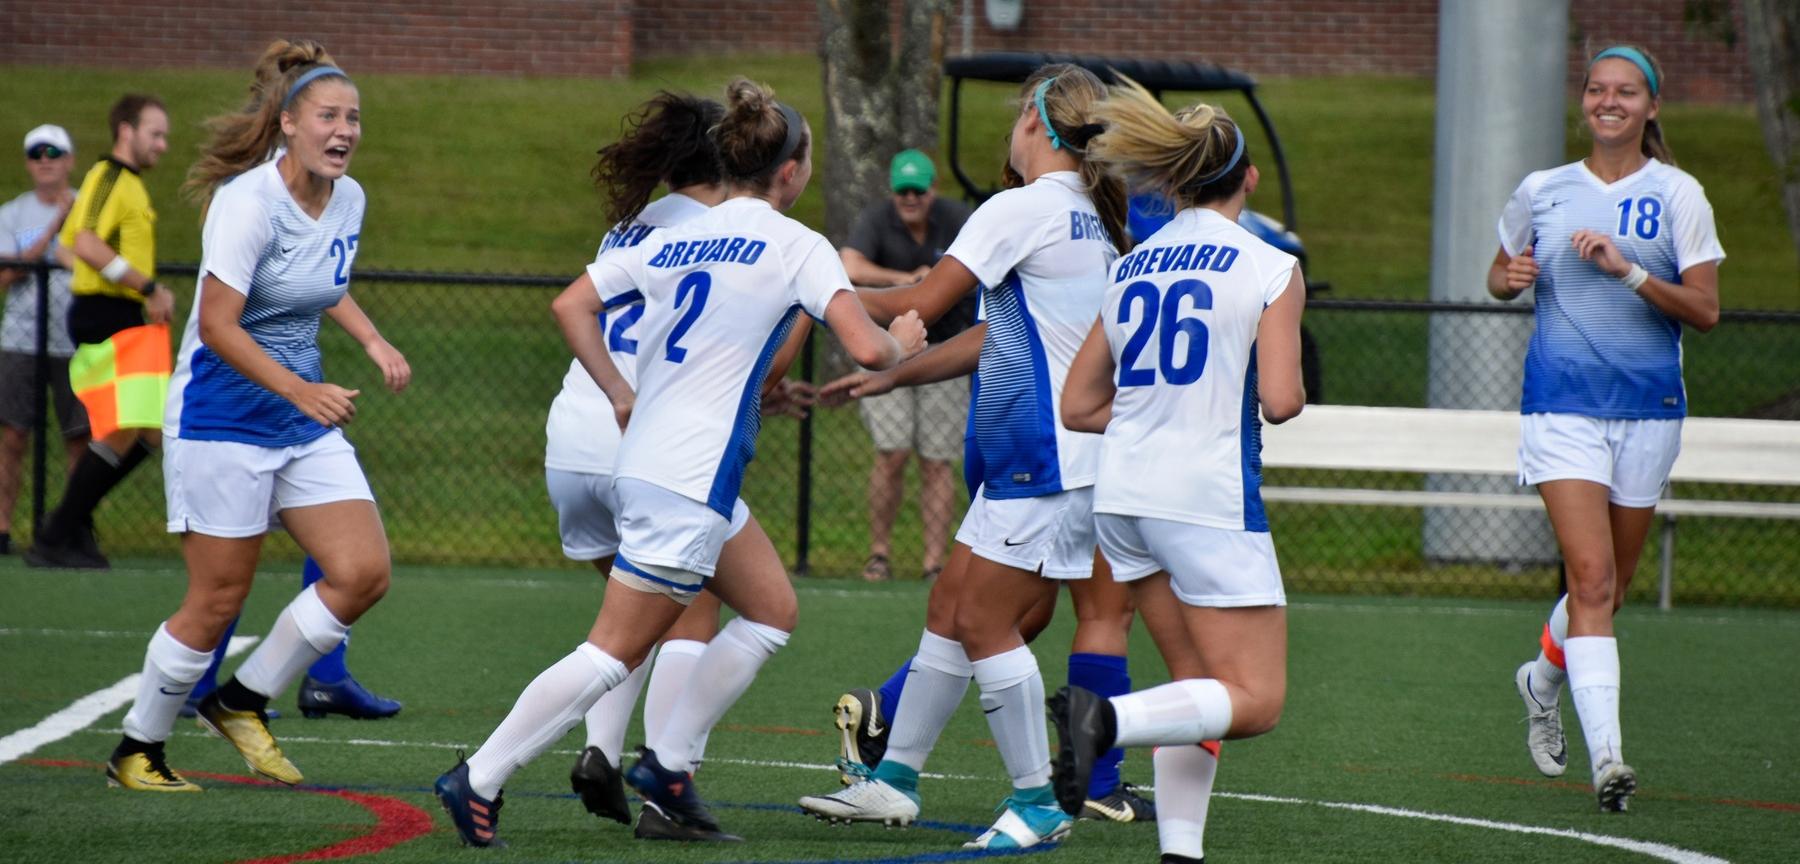 Brevard College Women's Soccer Featured in Fieldhouse Asheville - Tornados Boast Top Record in the Area